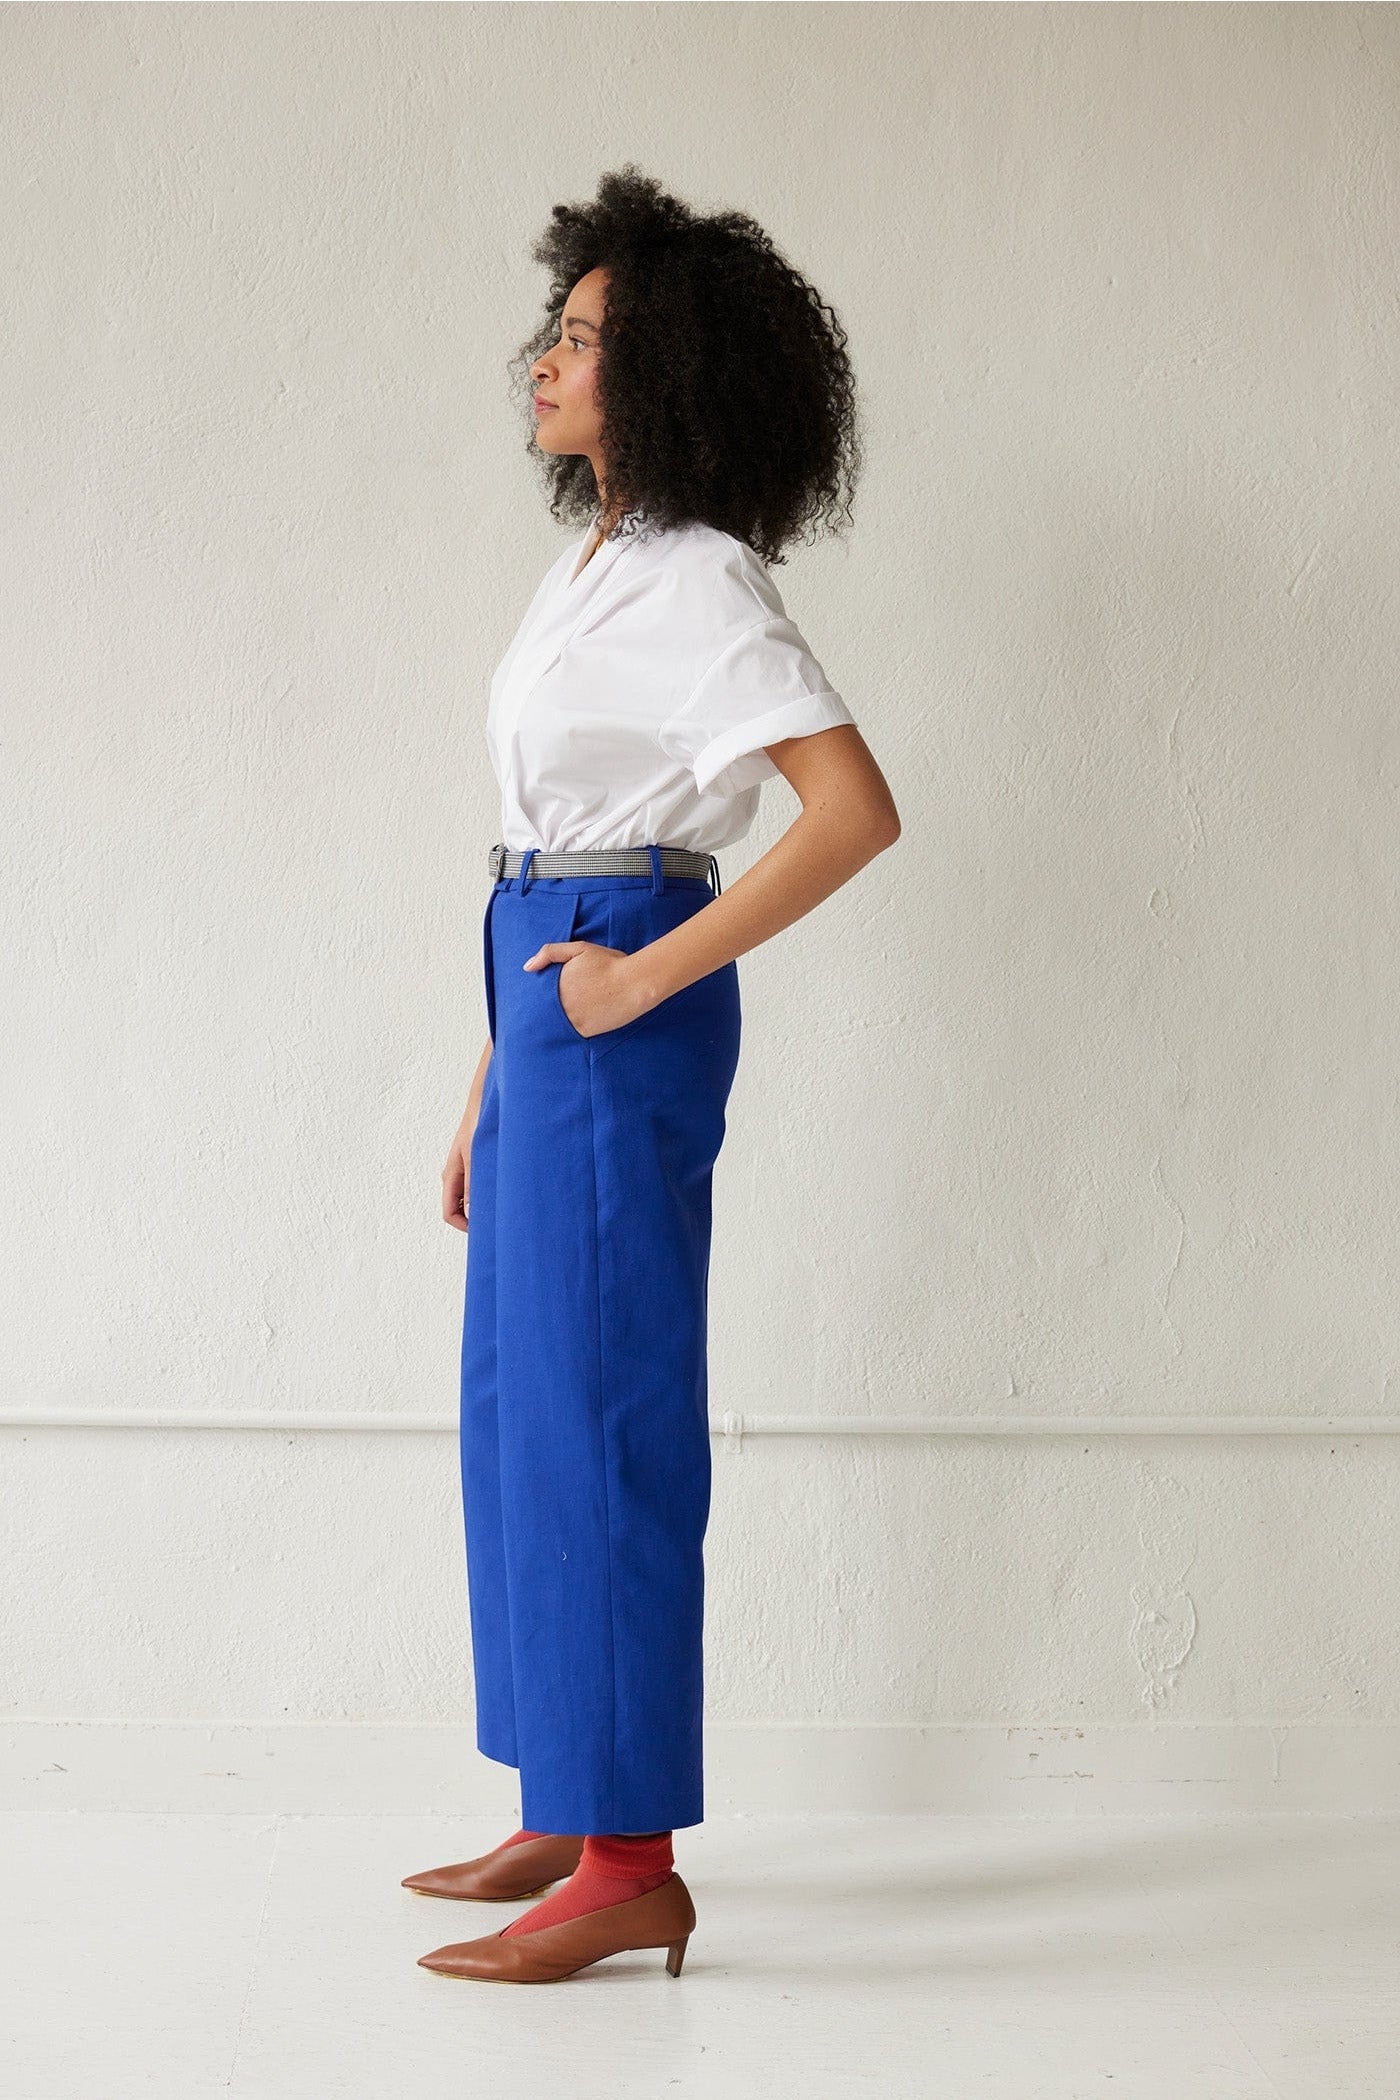 Piper Pant in Cotton Twill Pants CHRISTINE ALCALAY   